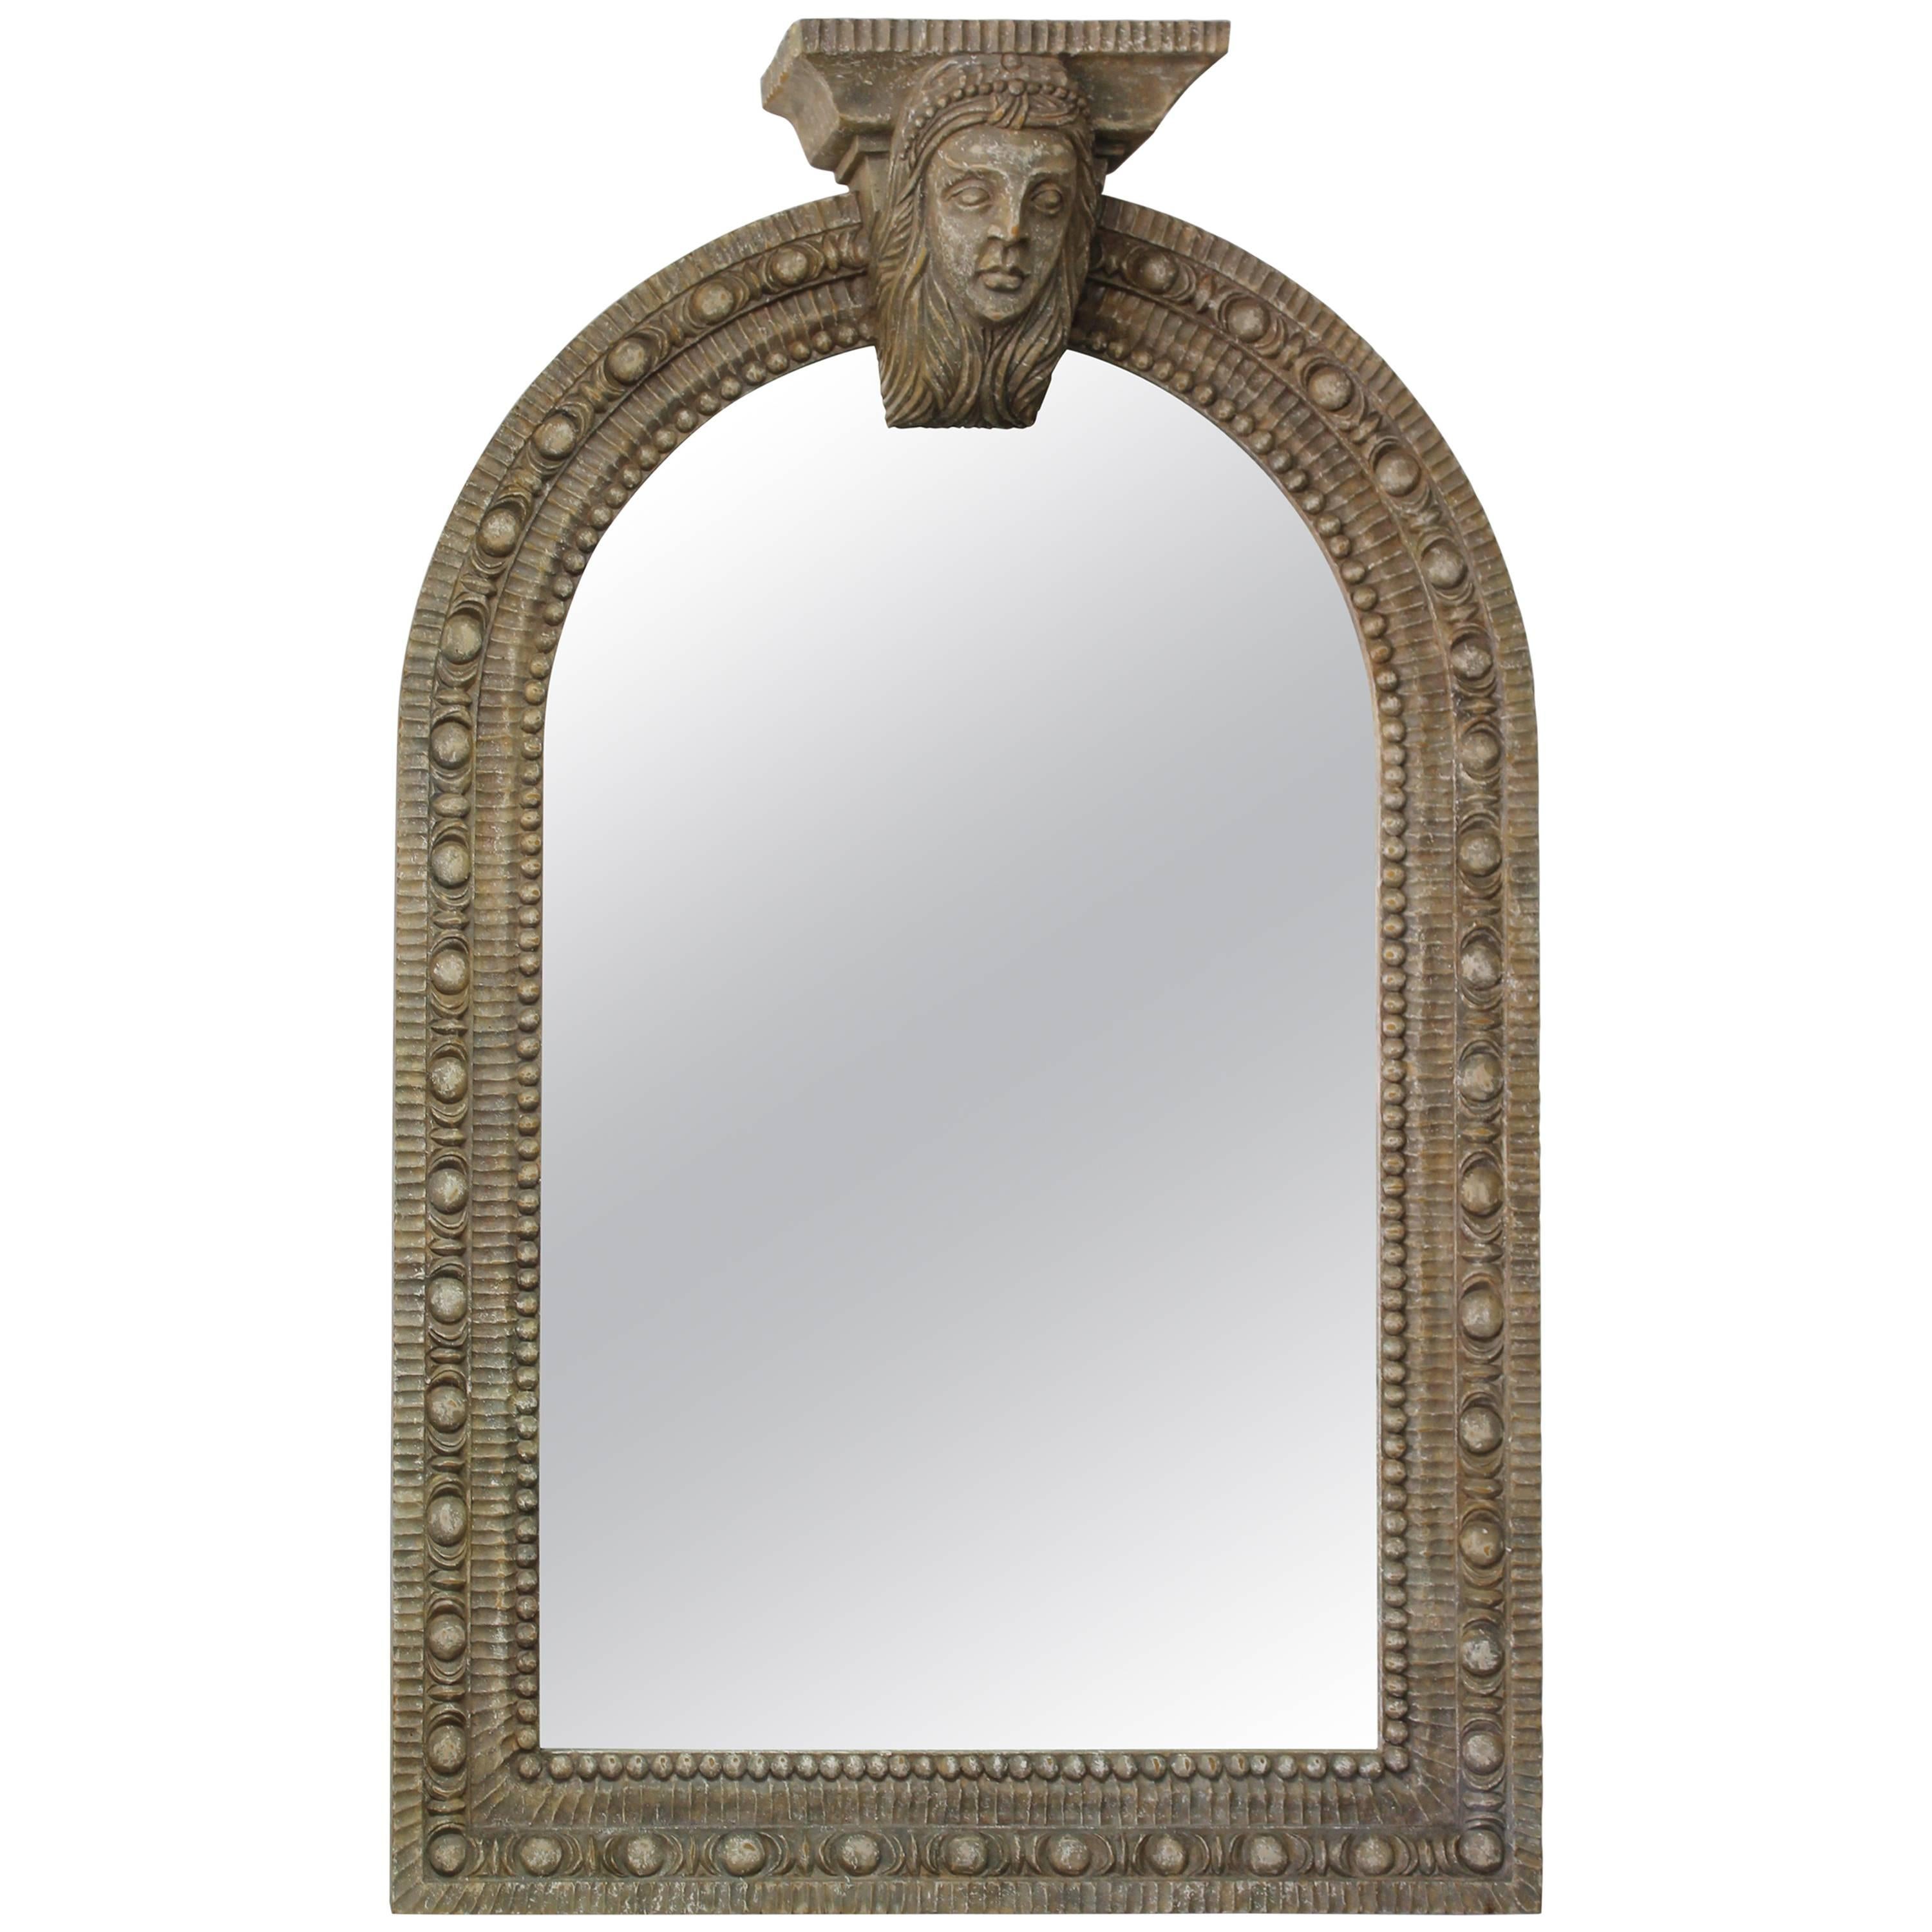 Large Carved Wood Neoclassical Arched Mirror